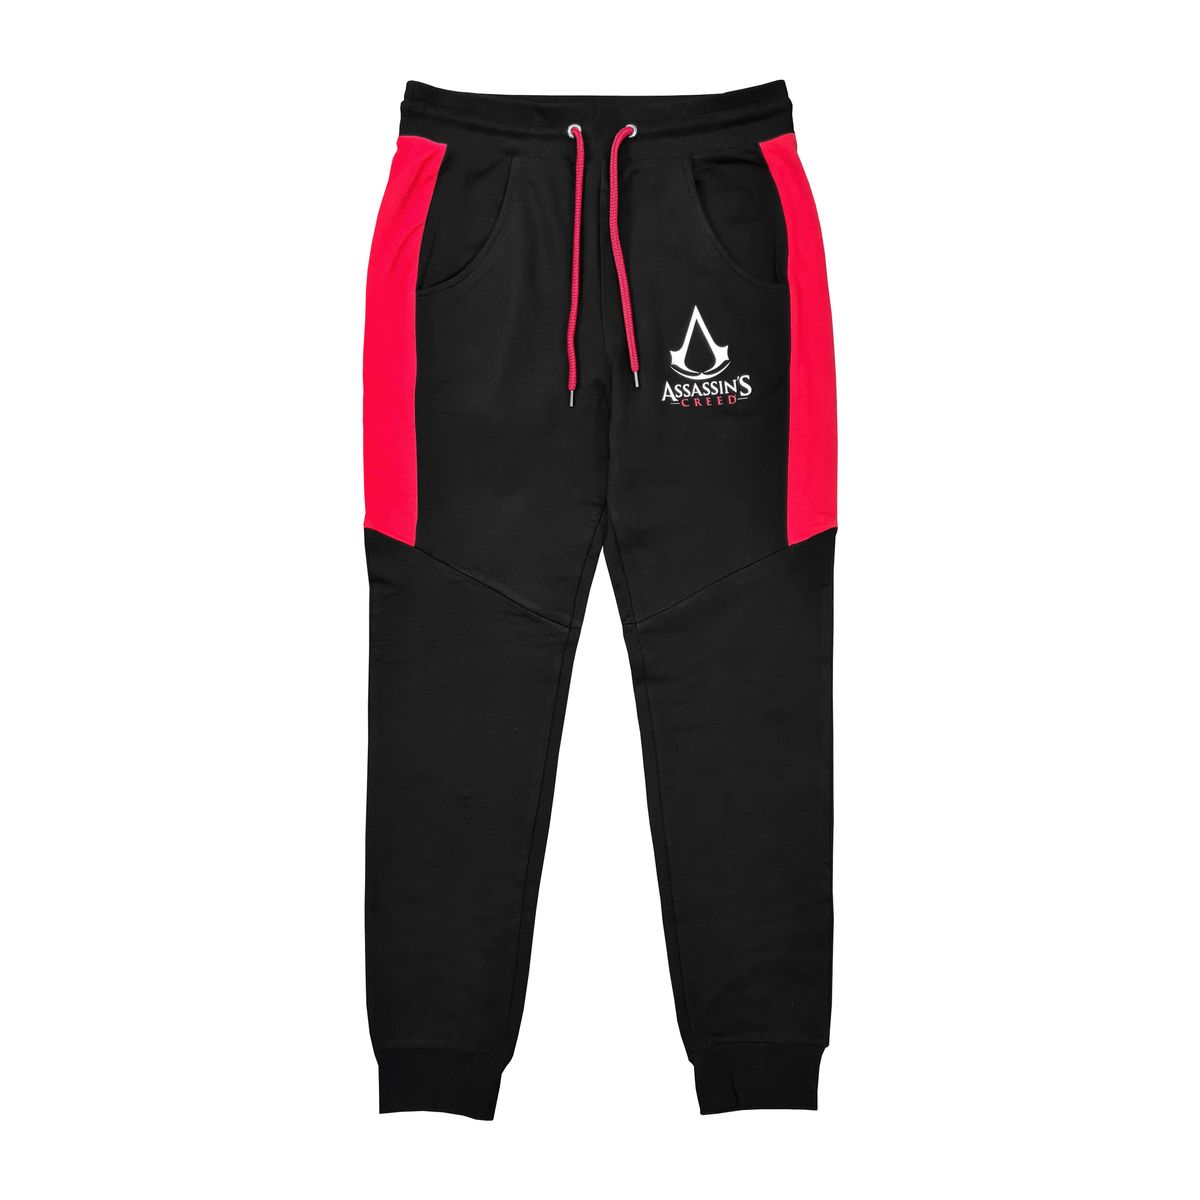 Assassin's Creed - Logo Men's Black and Red Joggers | Buy Online in ...